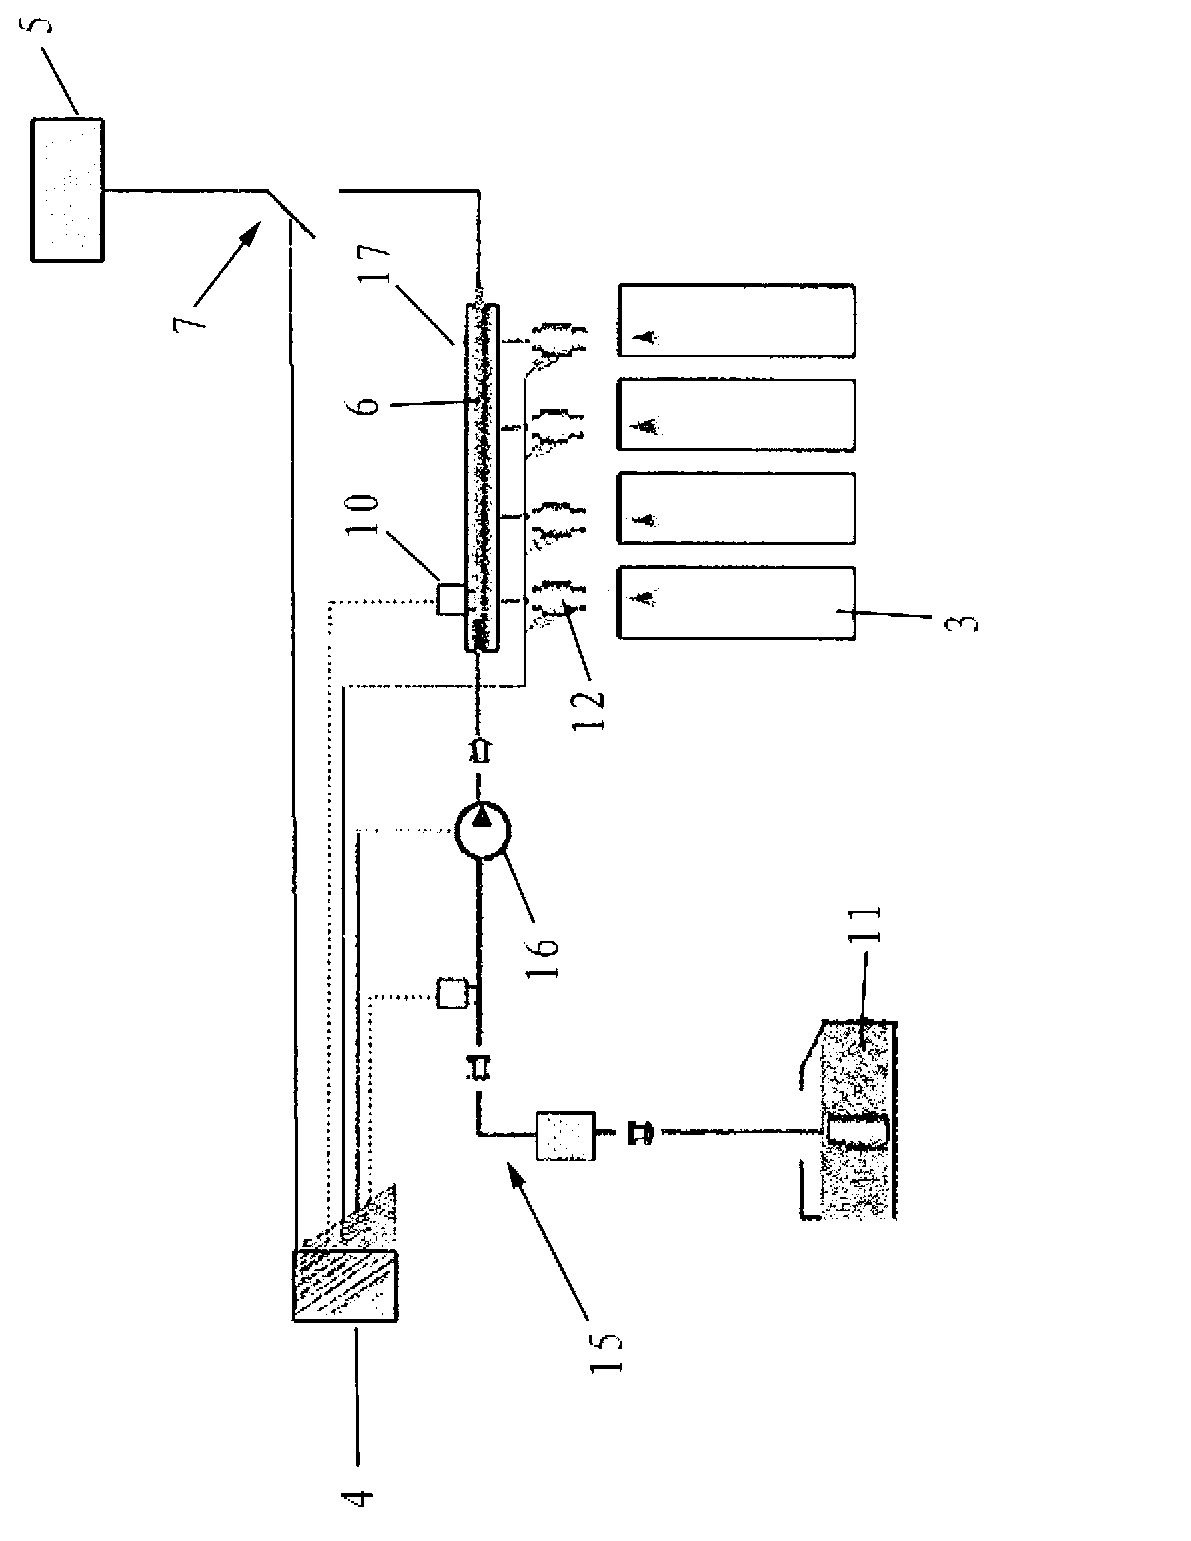 Method for reducing particulate emissions on a direct-injection petrol engine